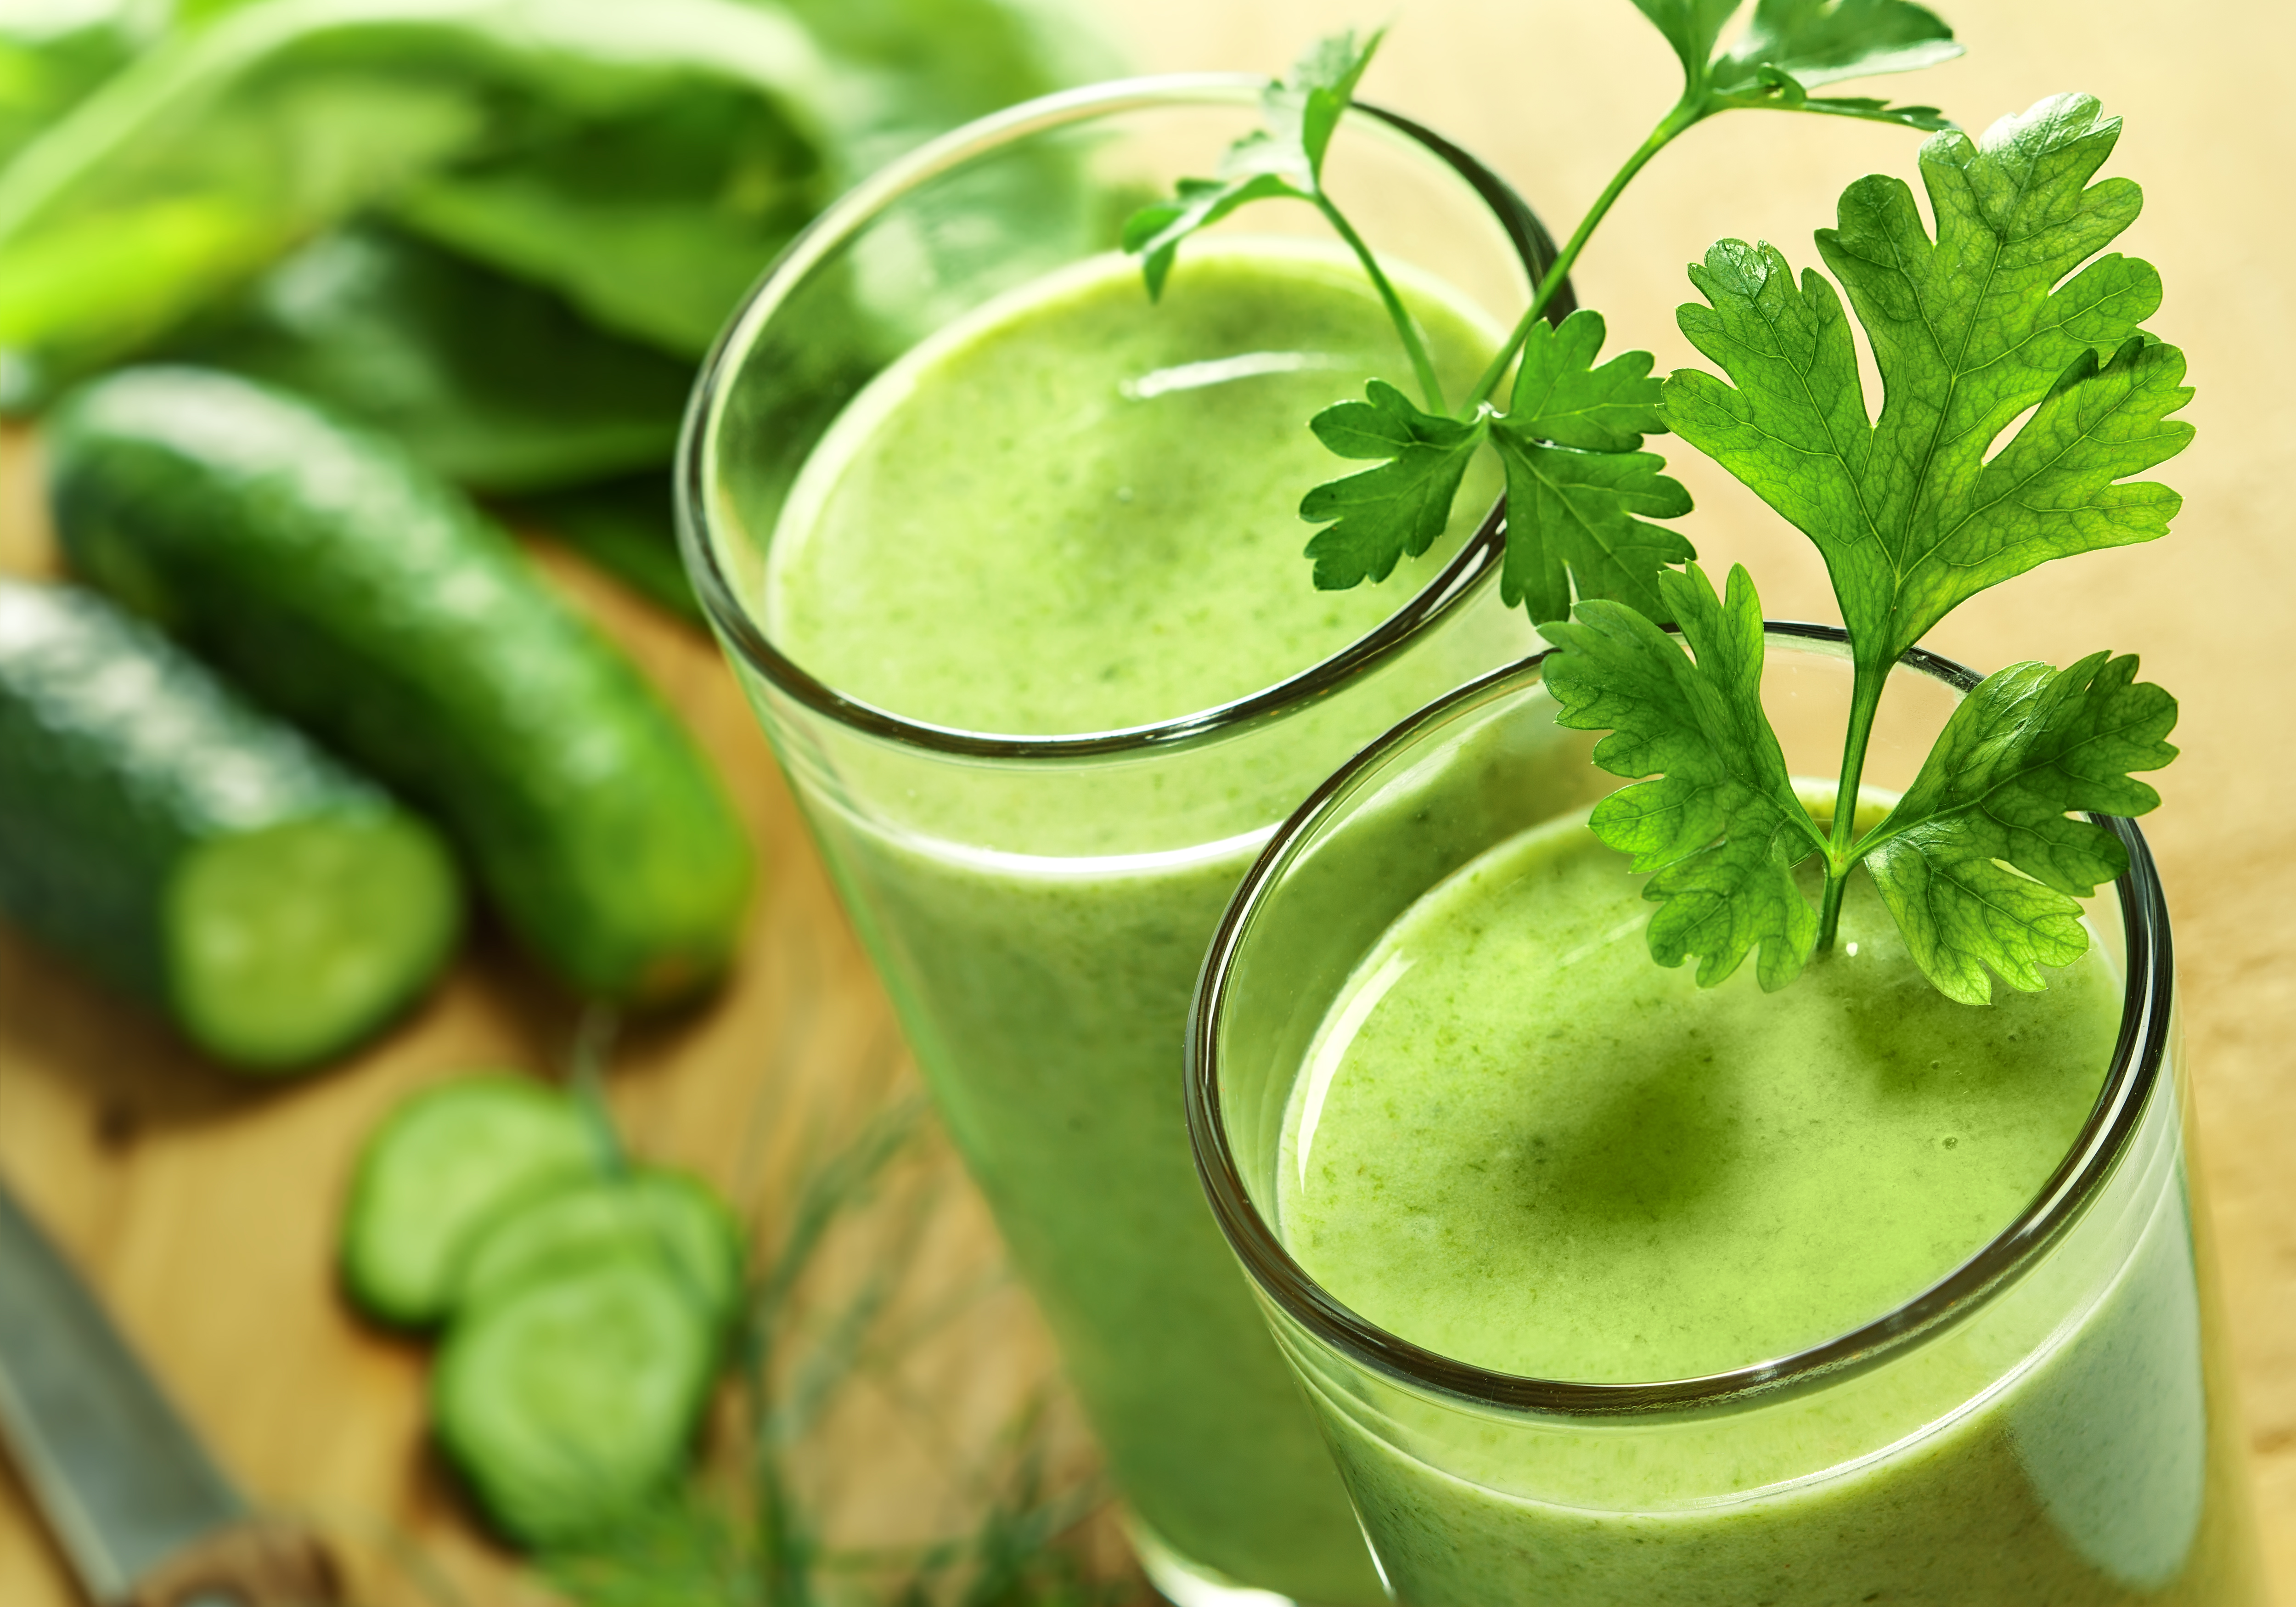 5 Best Juicers for Greens in 2022 - Reviews and Buying Guide